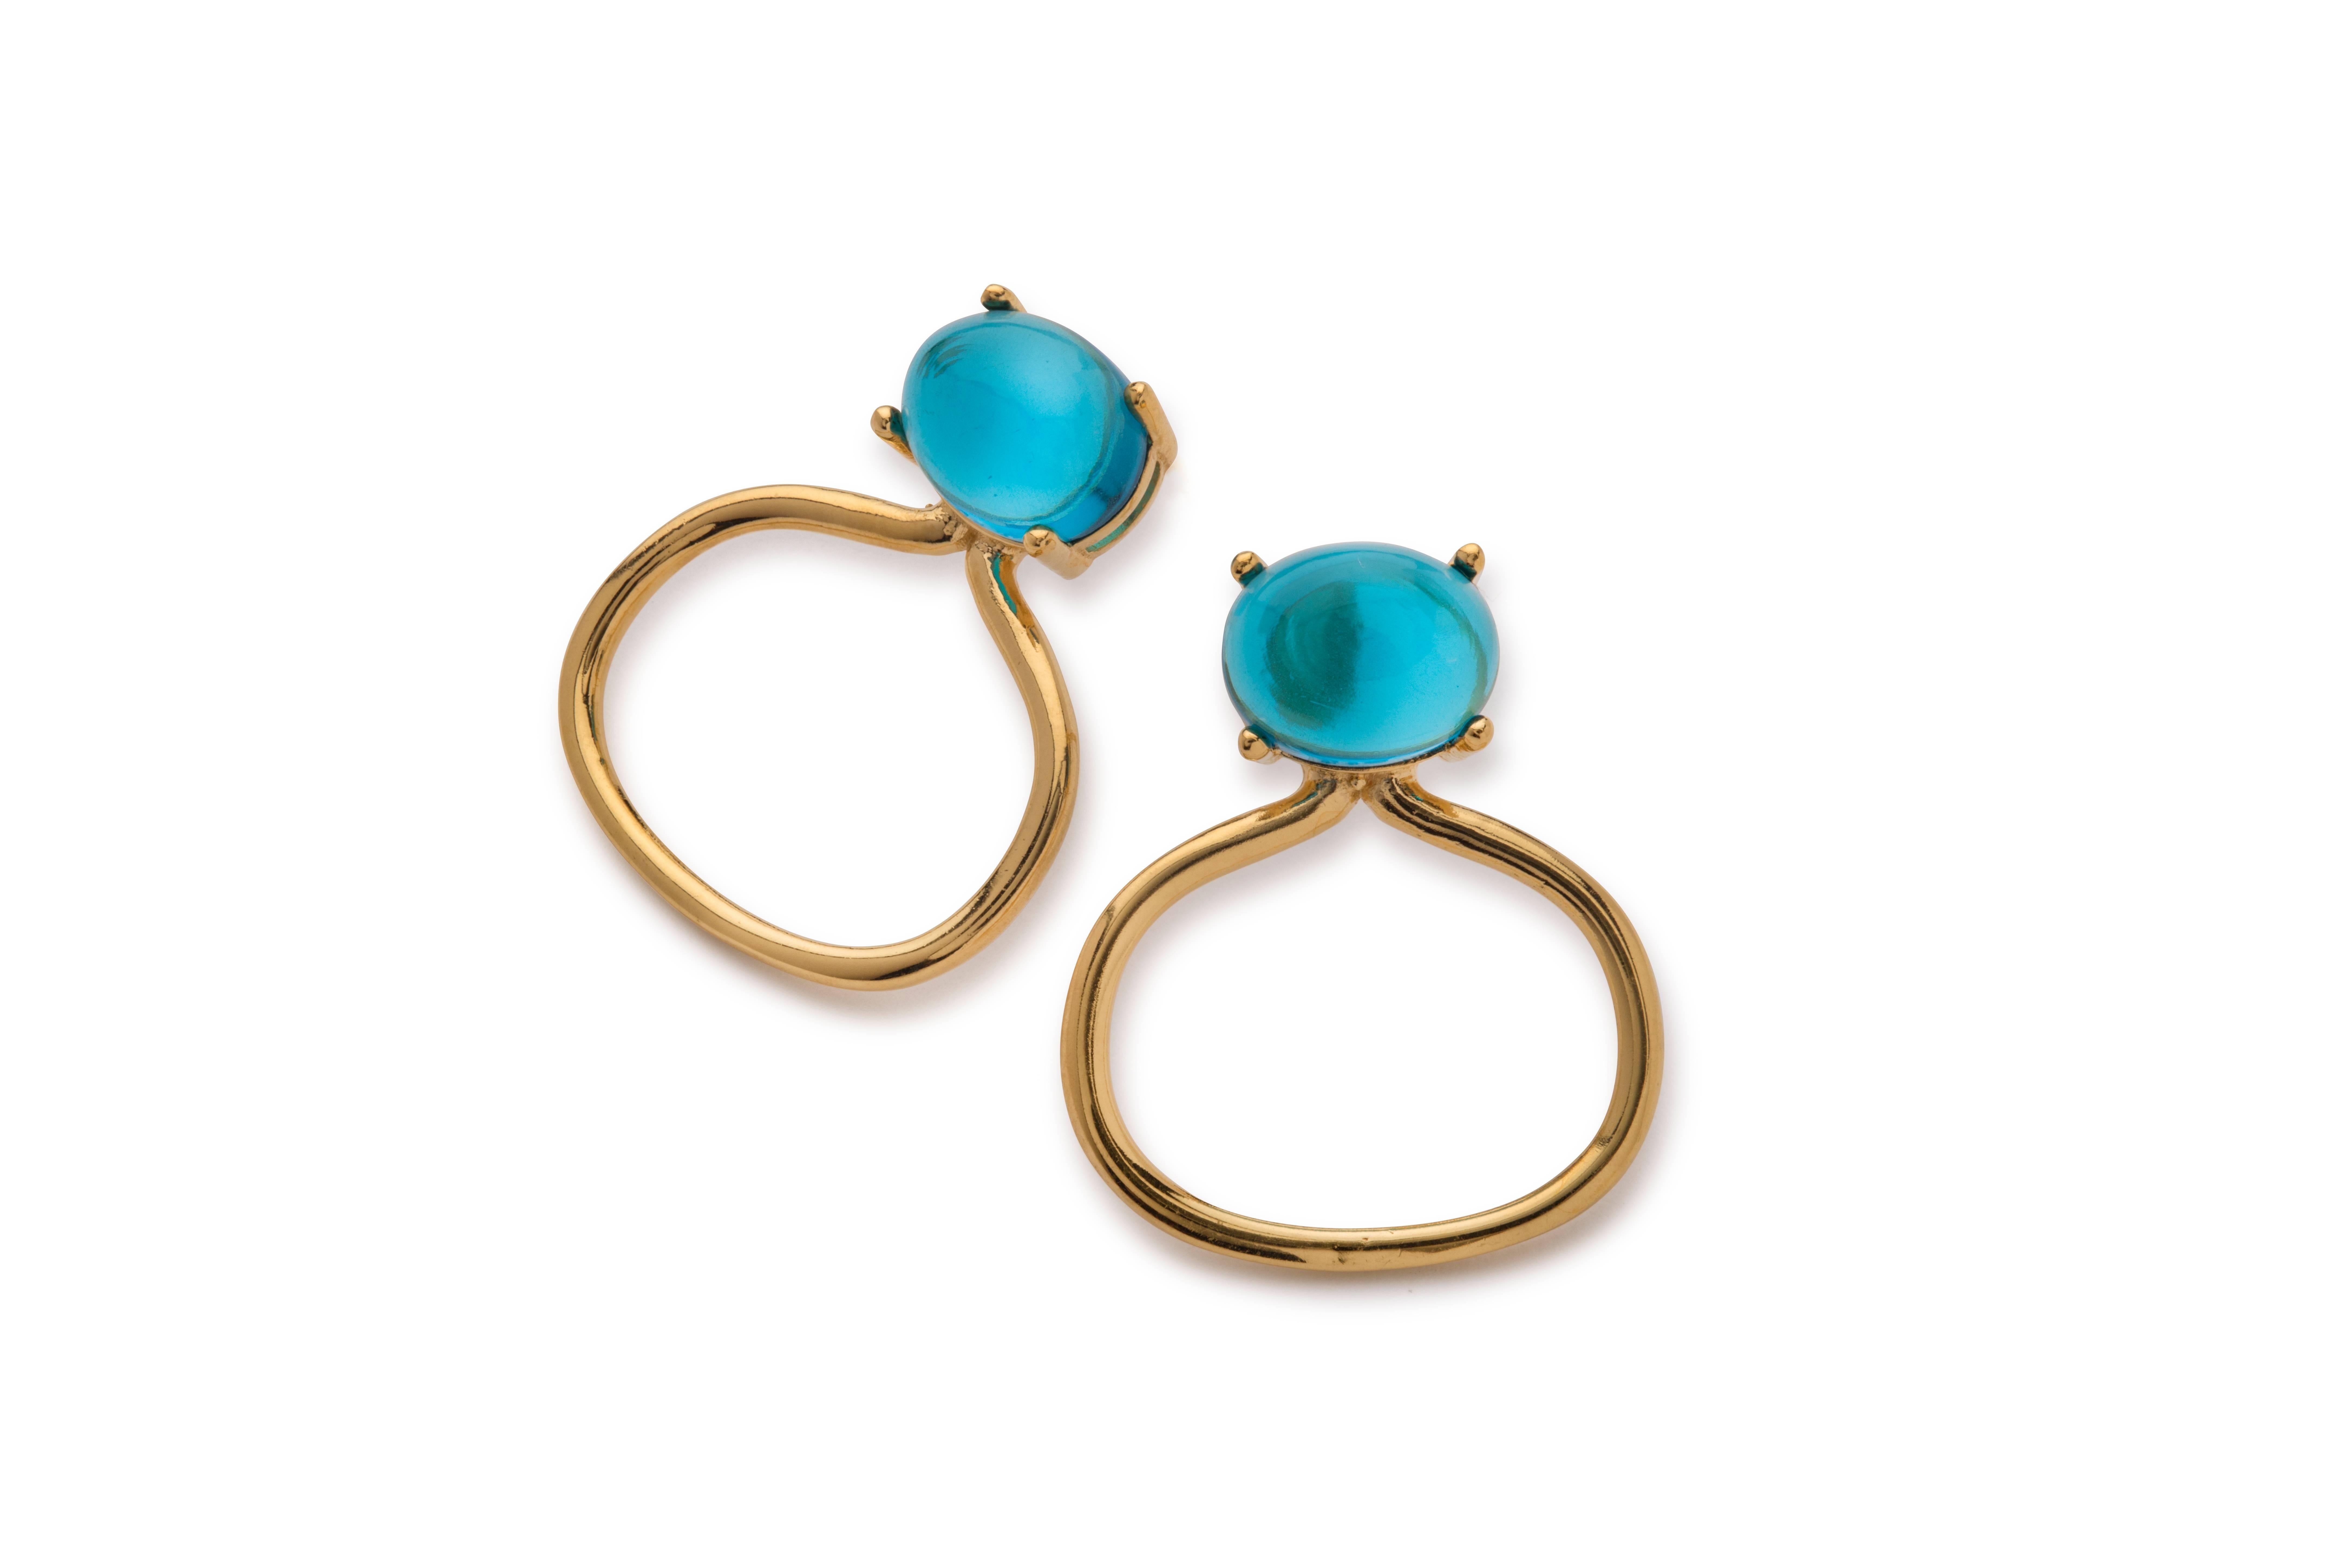 These organically shaped earrings are beautifully simple and so gorgeous, you may want them in multiple pairs. Like a good pair of jeans, you will want to wear these earrings with absolutely everything.
The total length of the earrings is 26mm, the